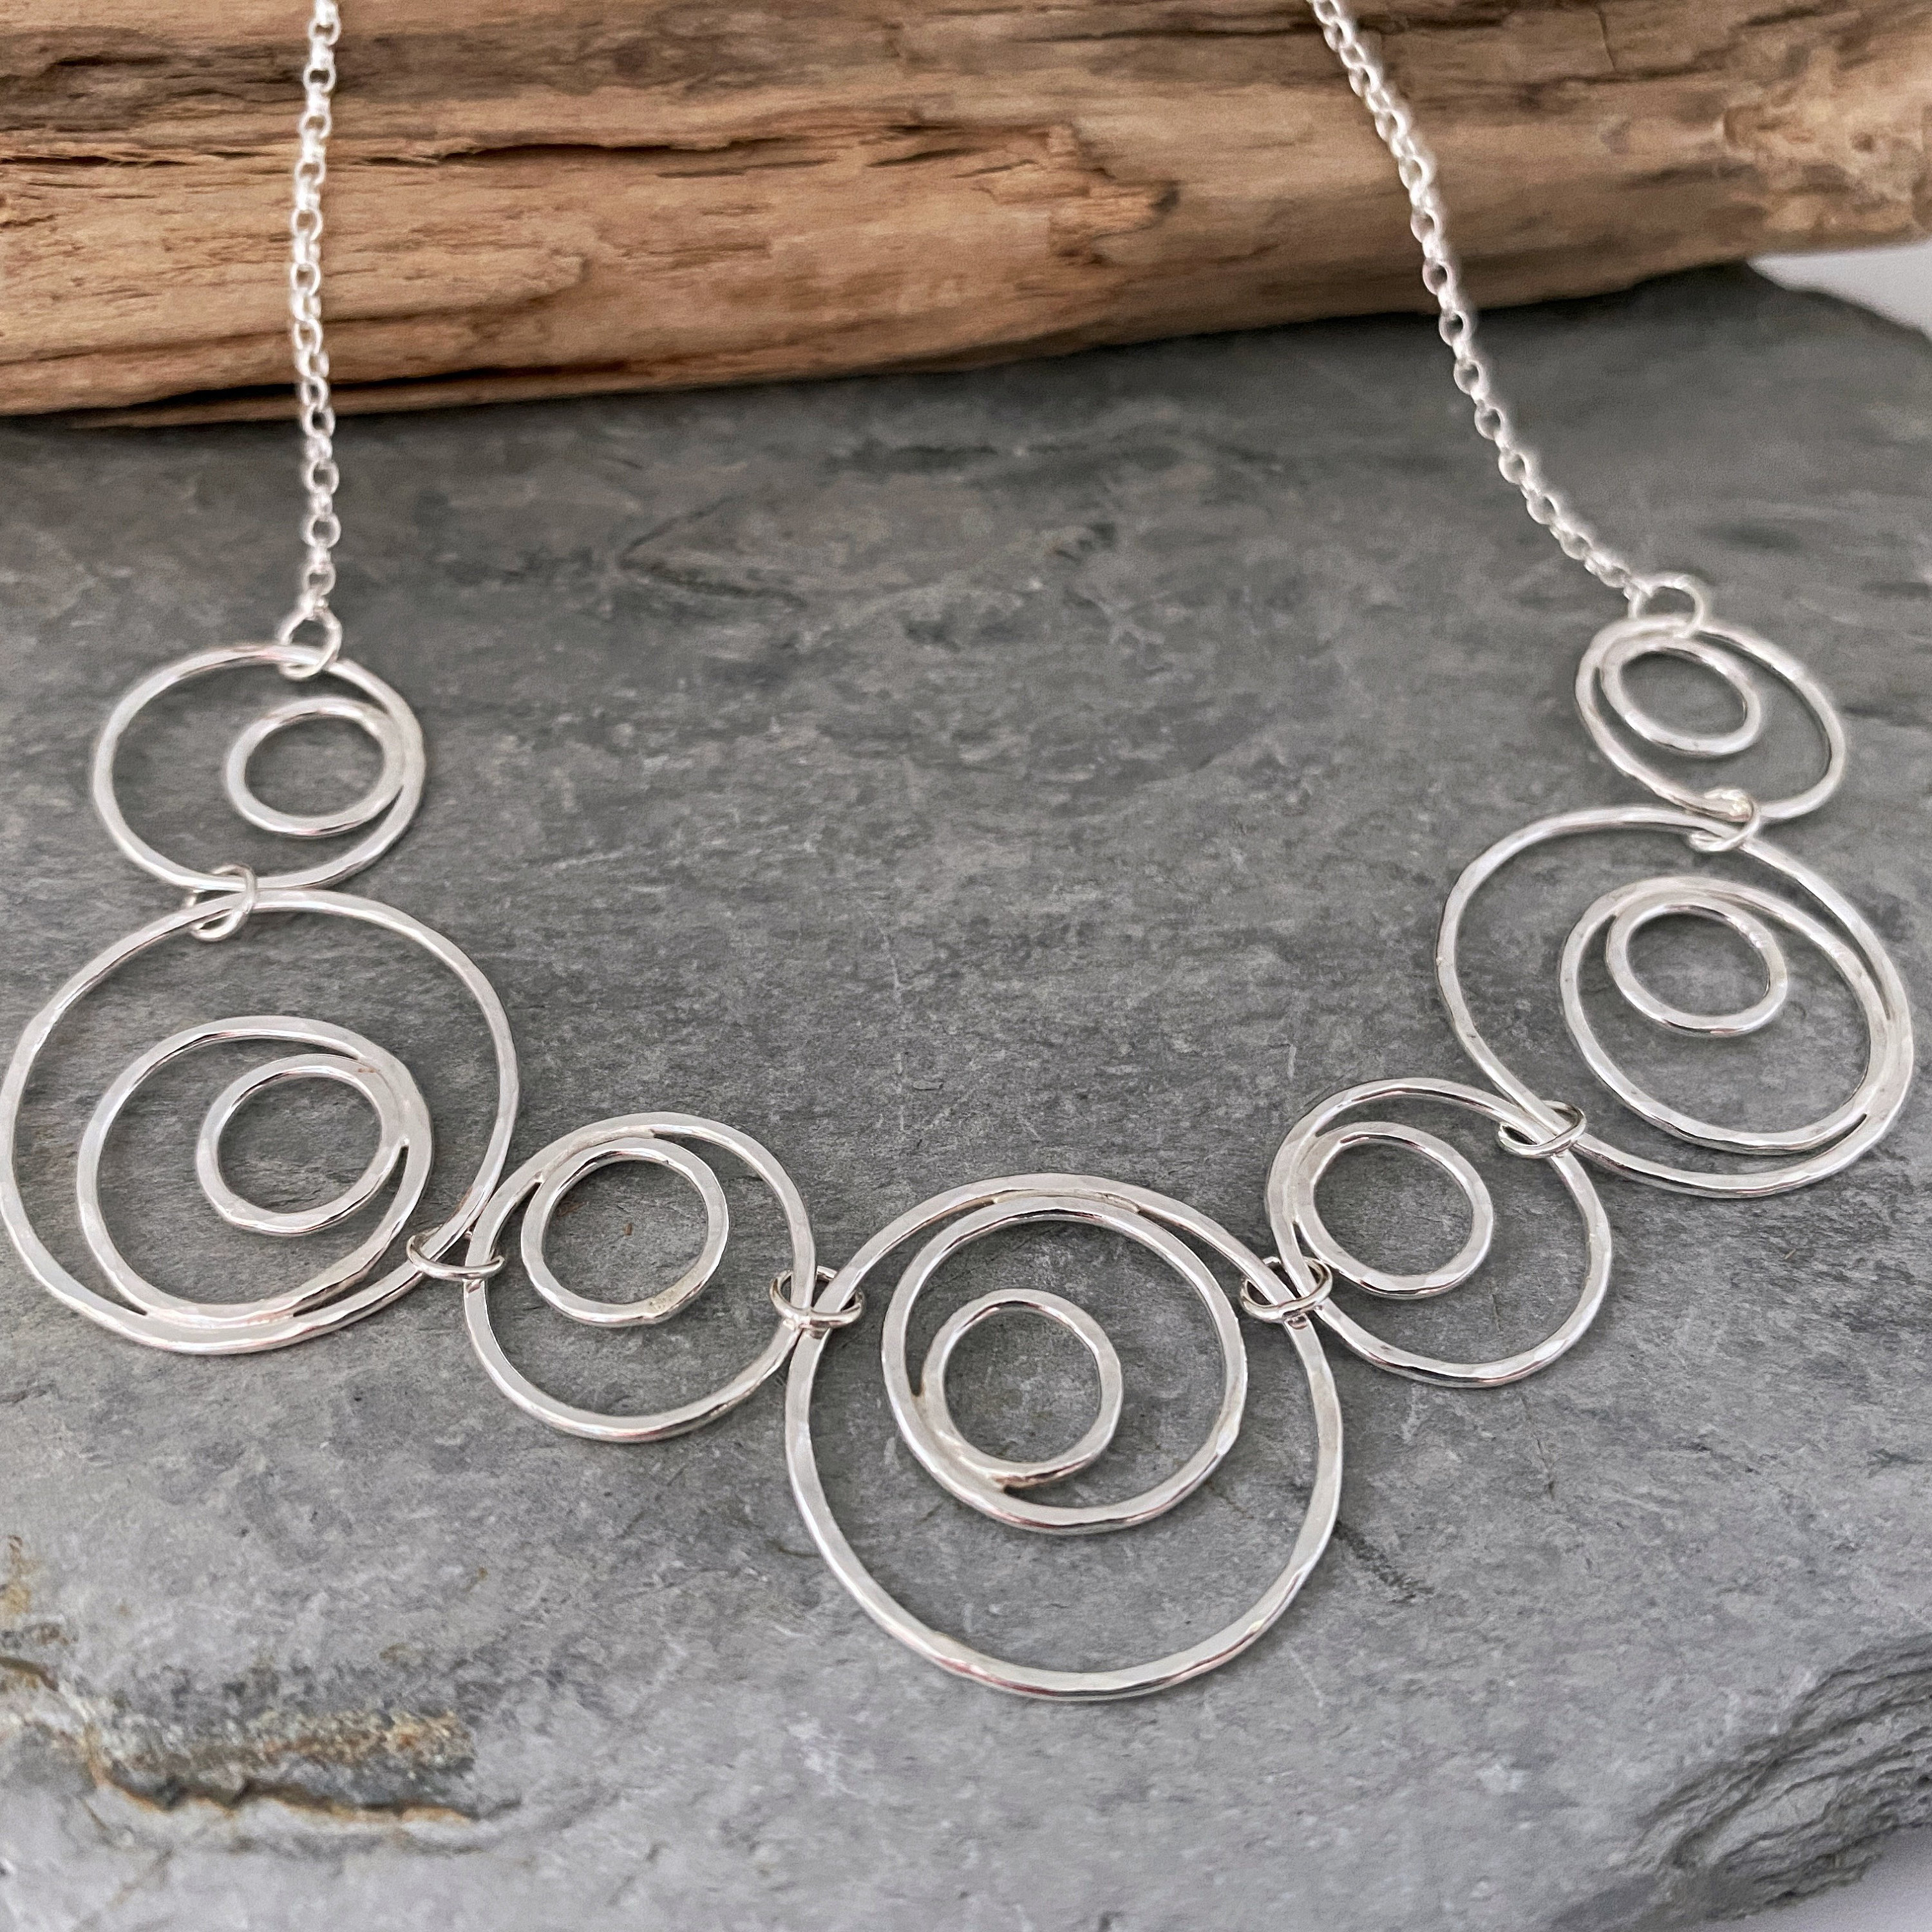 Silver Statement Necklace, Handmade Solid Silver Bib Circle Links & Chain Unusual Necklace Design